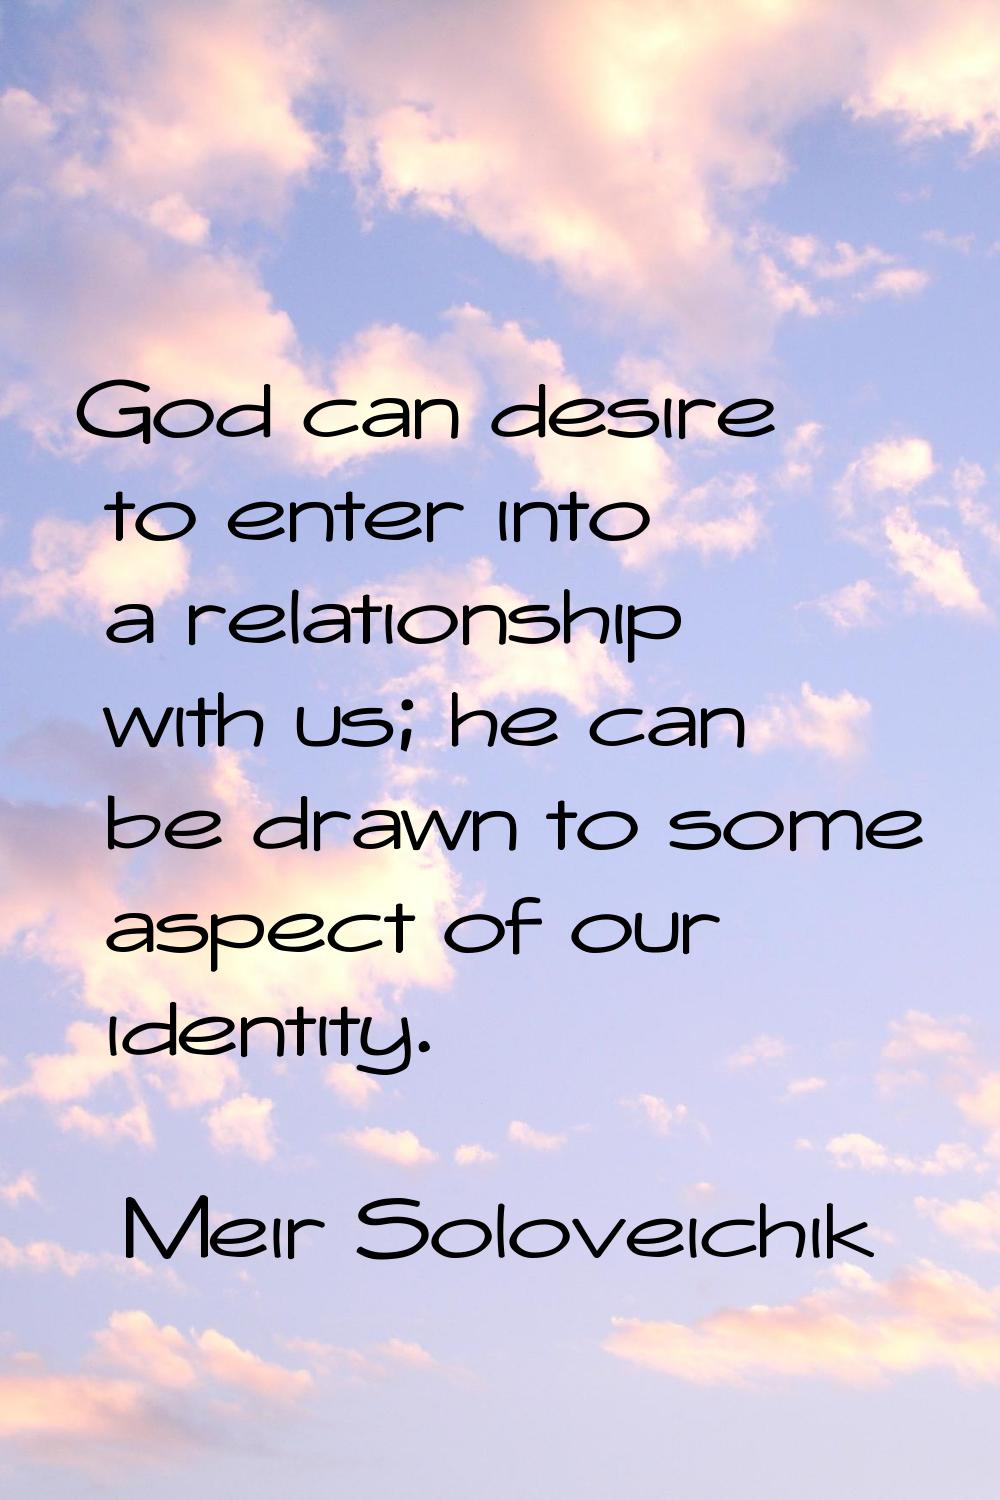 God can desire to enter into a relationship with us; he can be drawn to some aspect of our identity